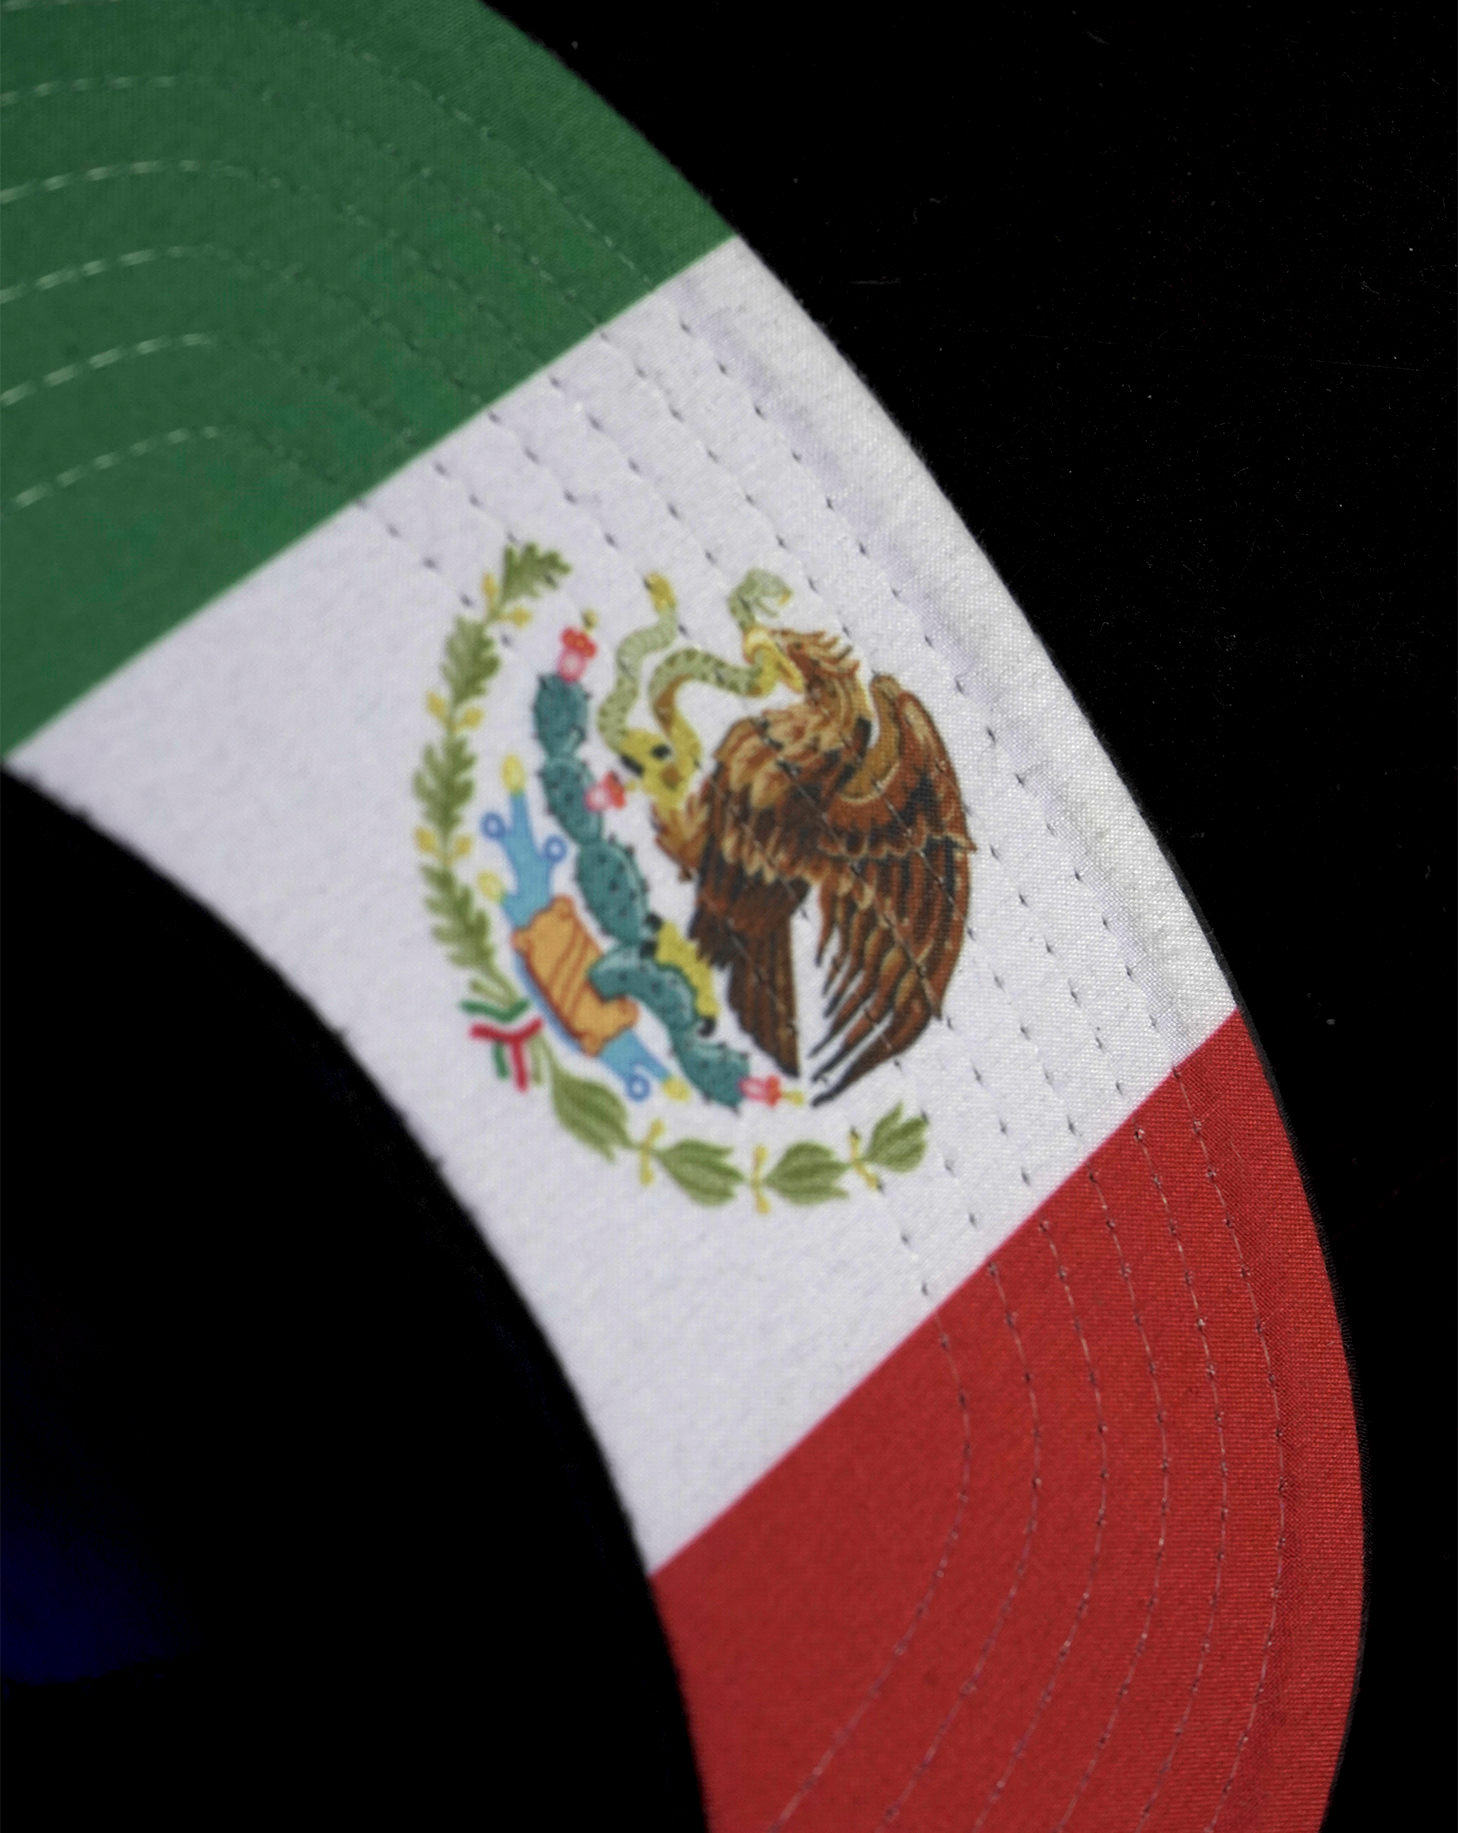 CHIH Snapback w/Mexican Flag